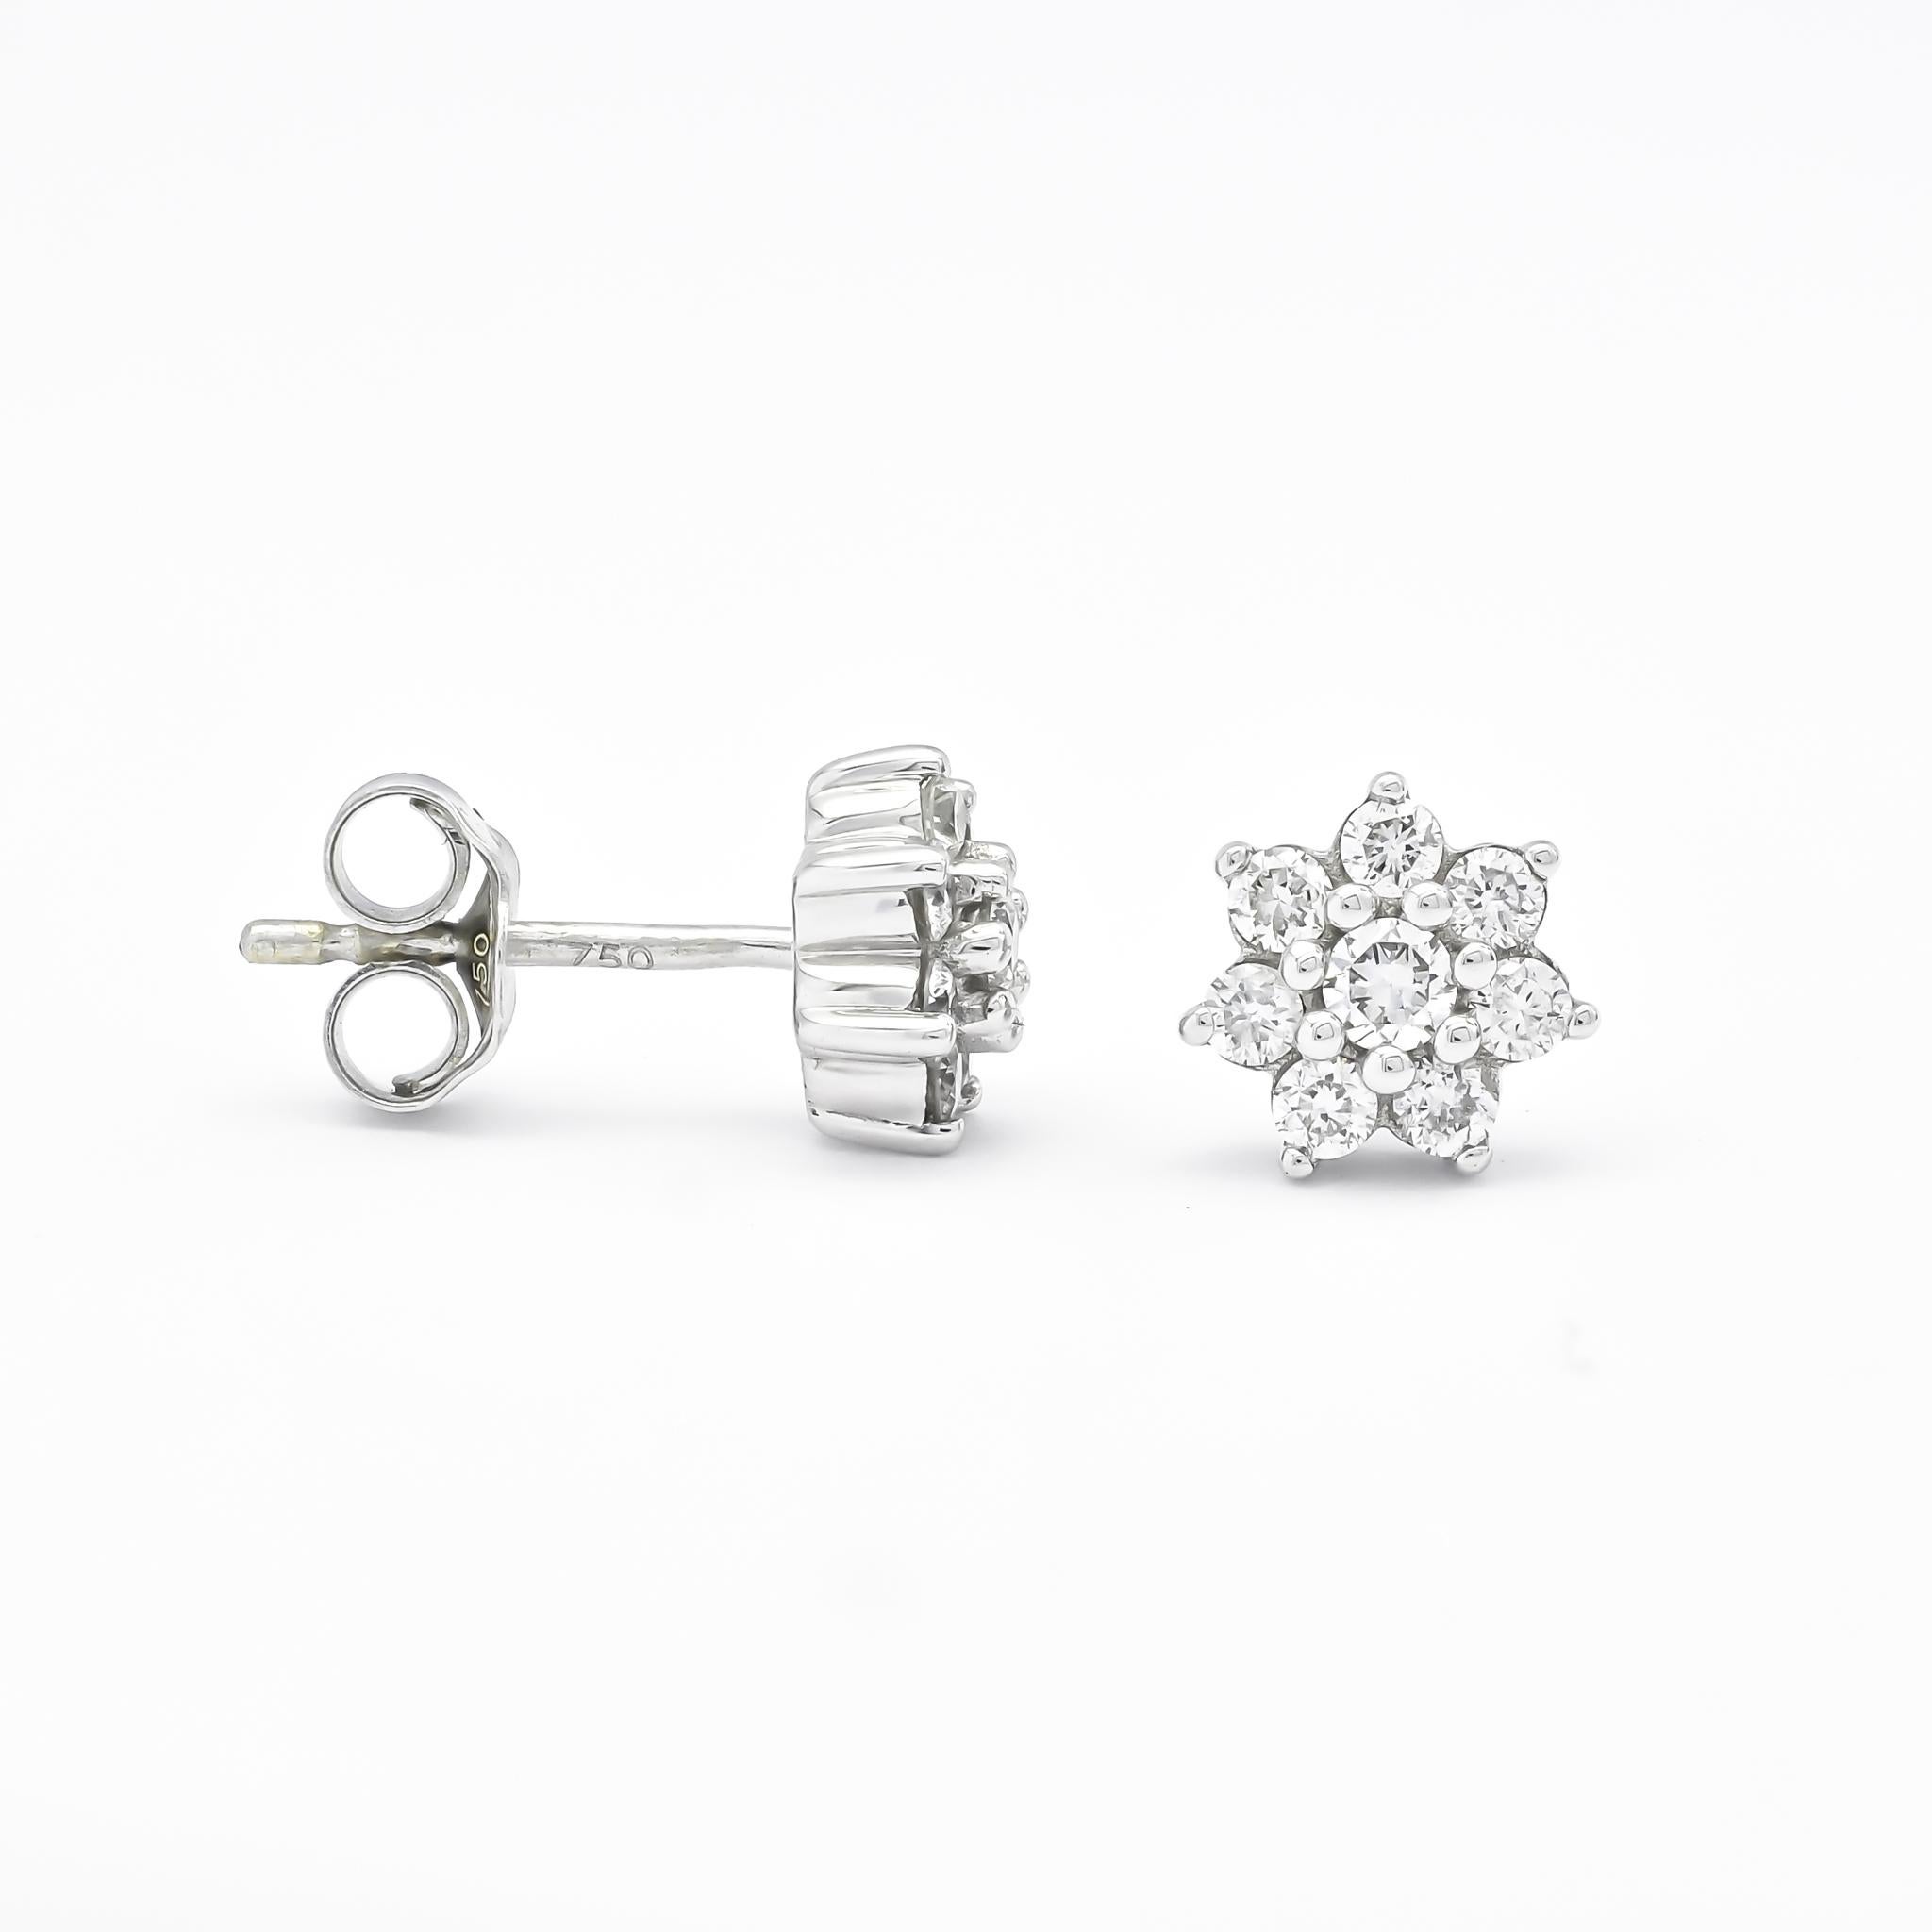 Get ready to add serious sparkle to your ears with these stunning floral stud earrings! These earrings are made with 18KT white gold and feature natural diamonds, epitomizing elegance and luxury. The brilliant round cut of the diamonds and prong